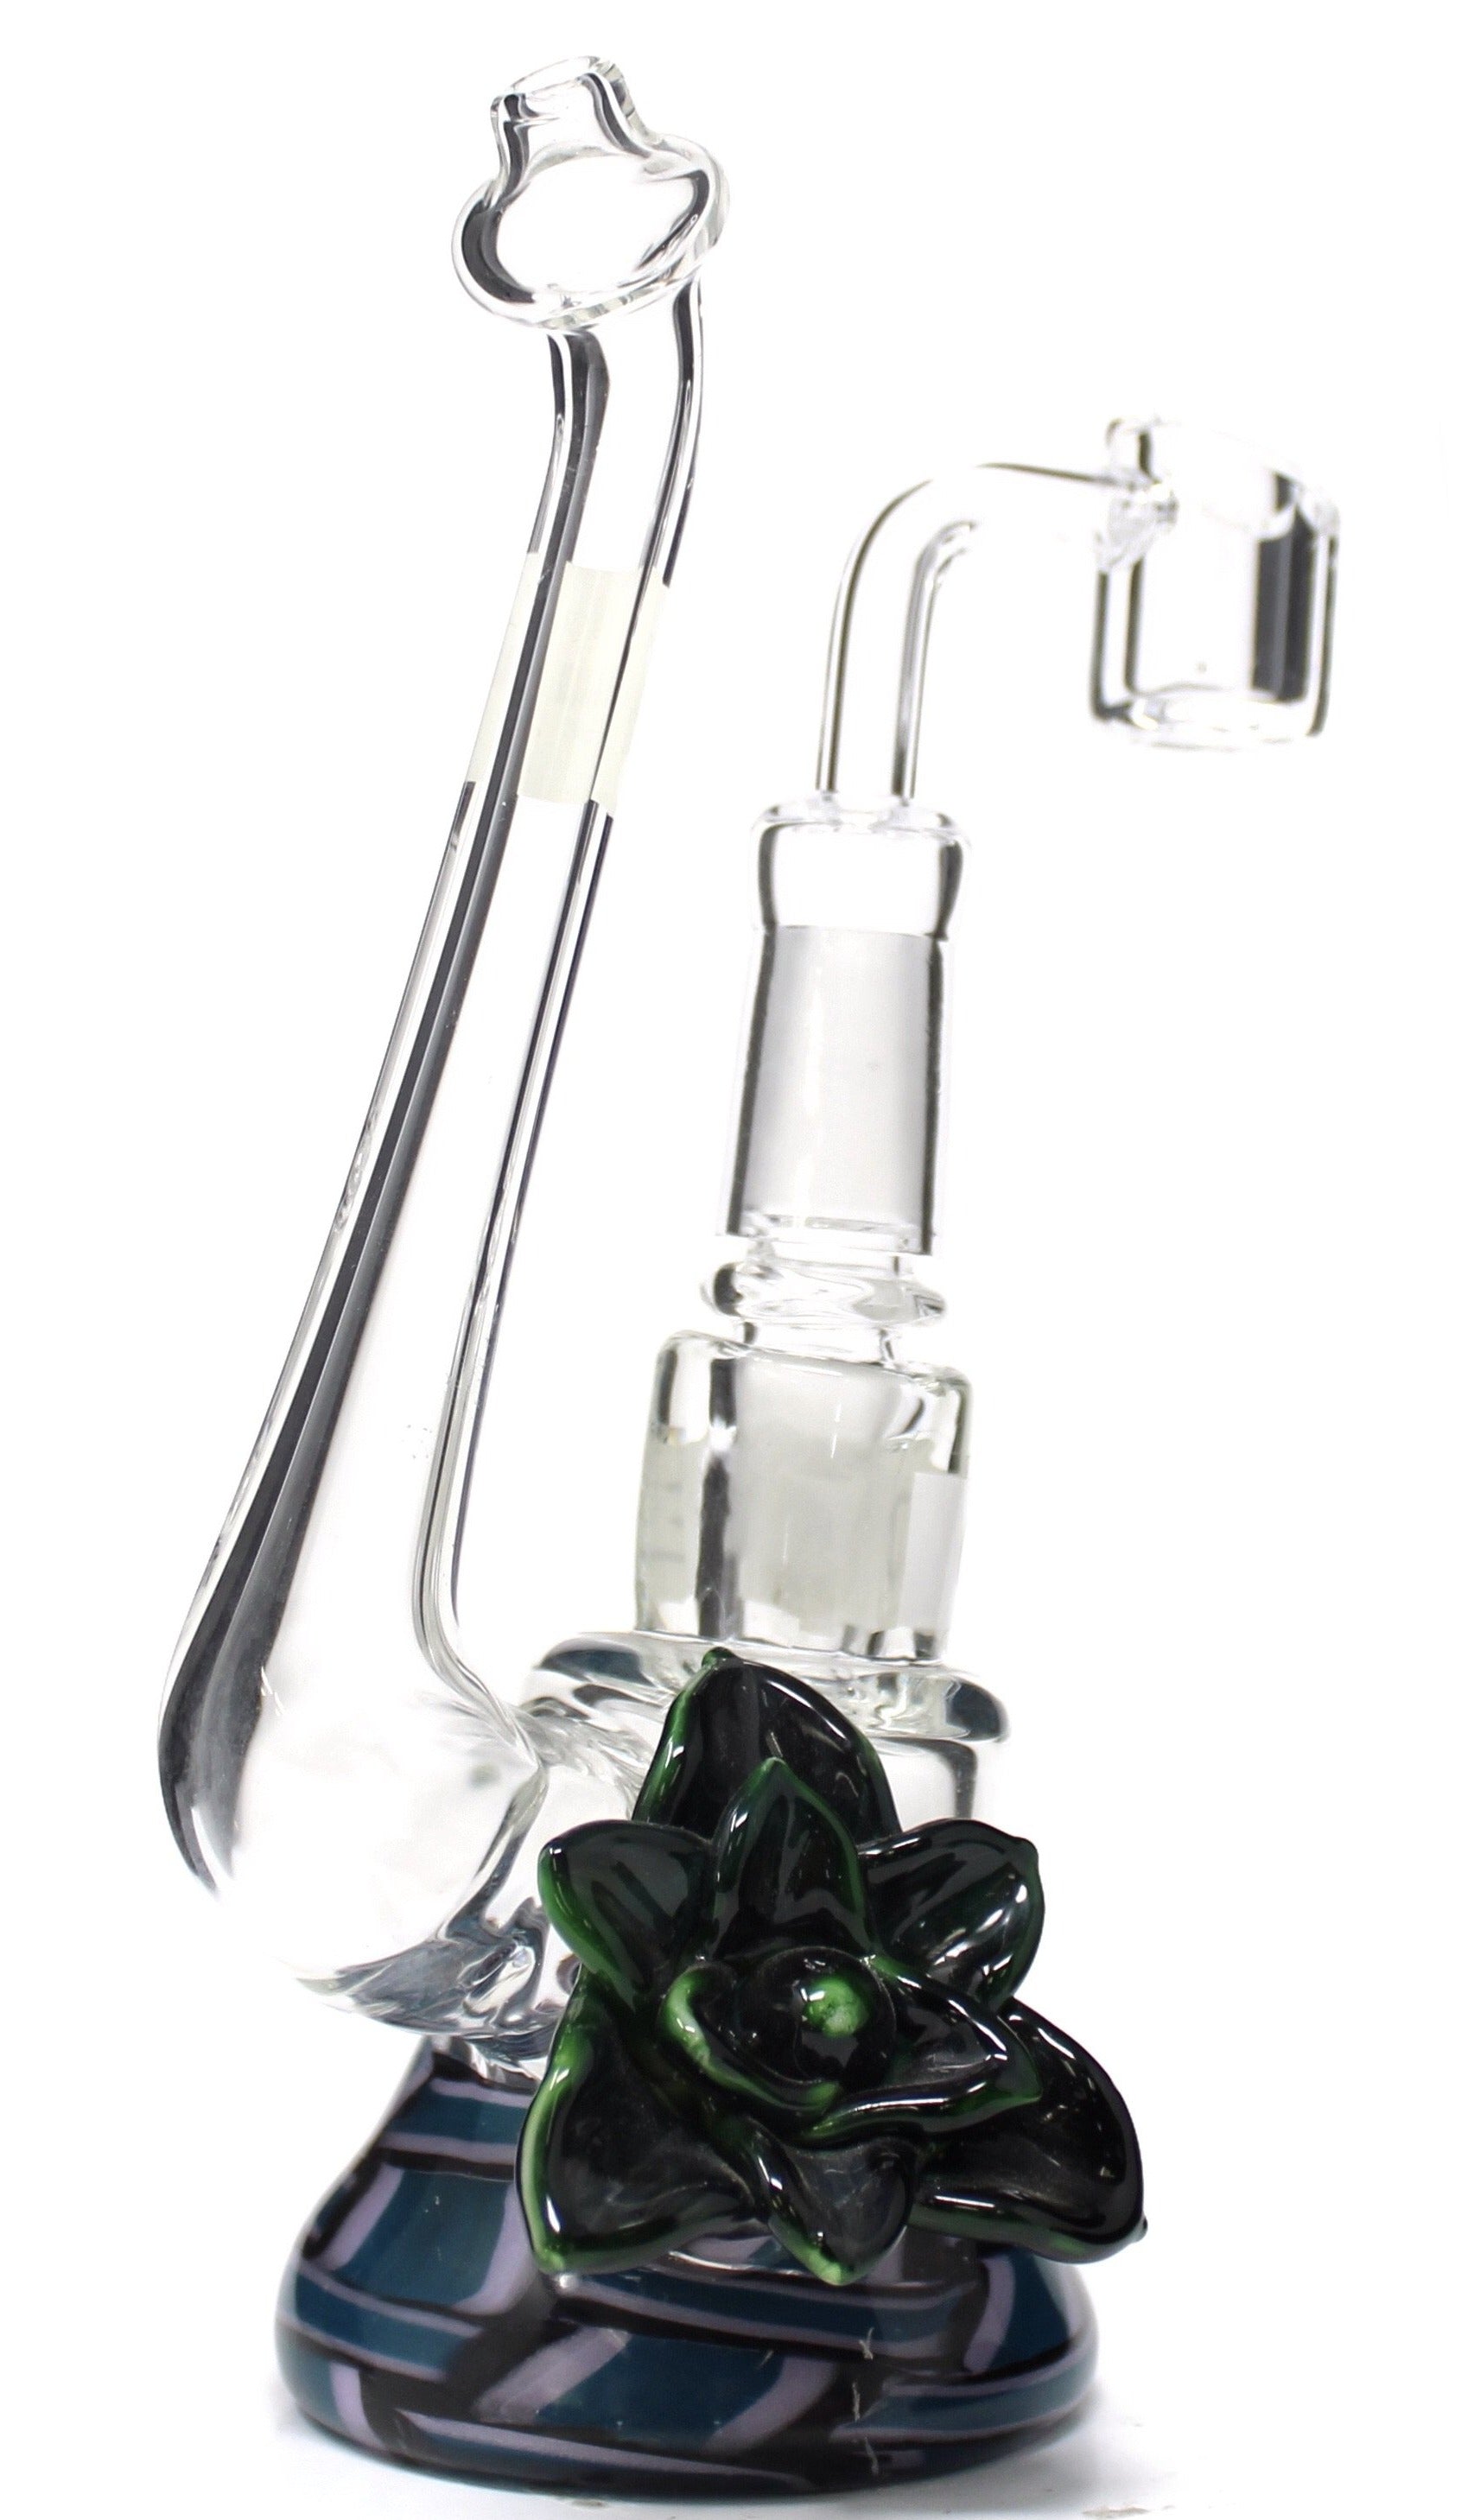 Sherlock styled body, quartz banger nail, 3D glass art on the base. This rig is perfect for dabbing your favorite wax.